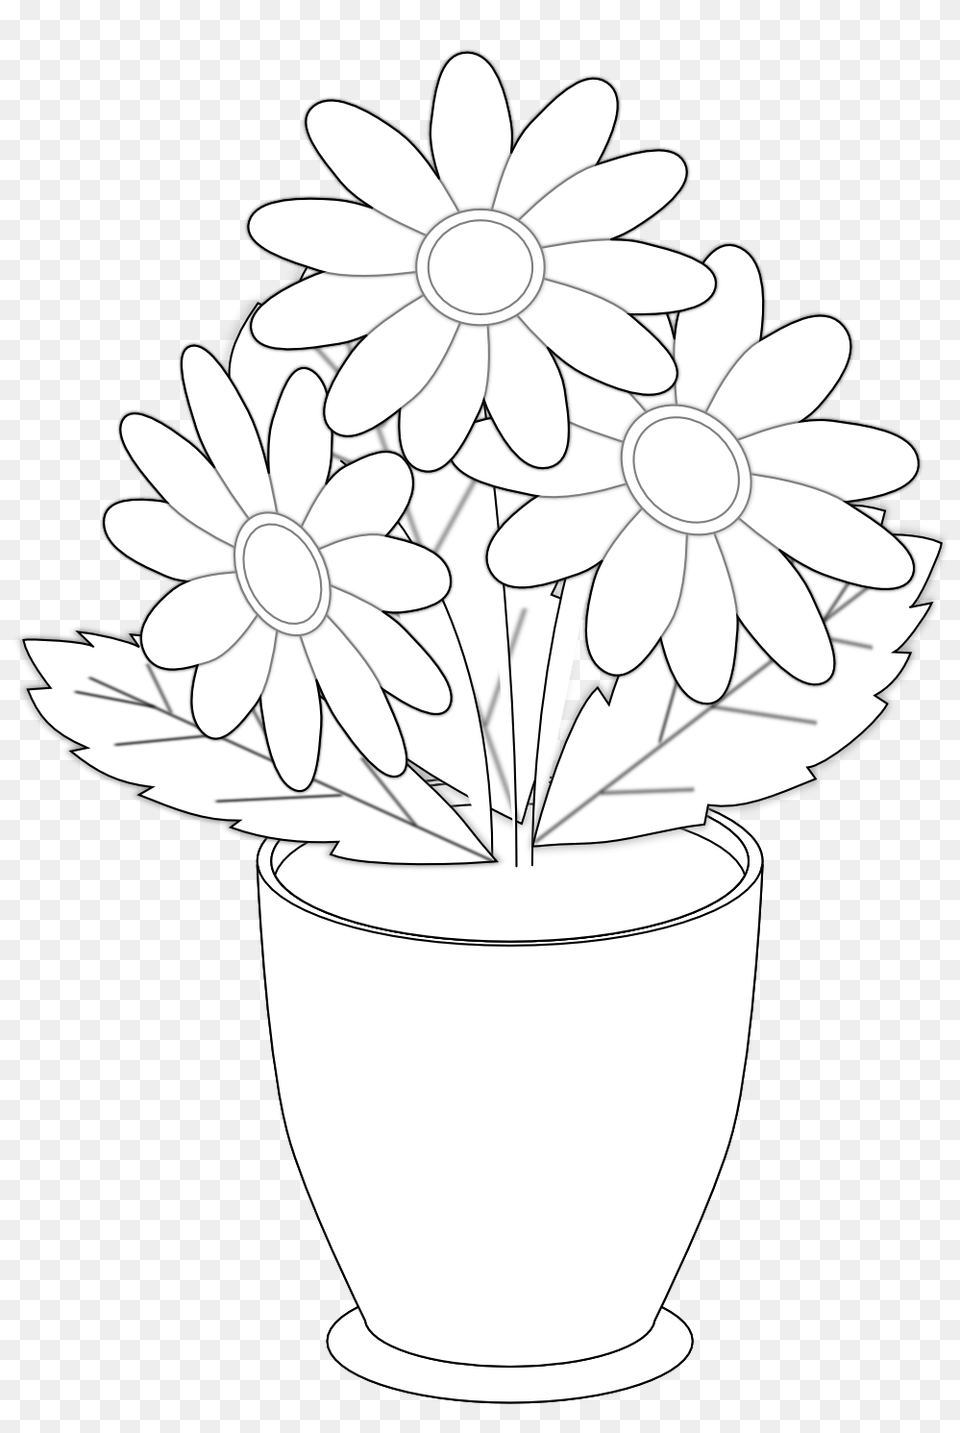 Vase Clipart Clip Art Draw The Flower Vases Download Flowers Clip Art Black And White, Daisy, Plant, Potted Plant, Drawing Free Transparent Png